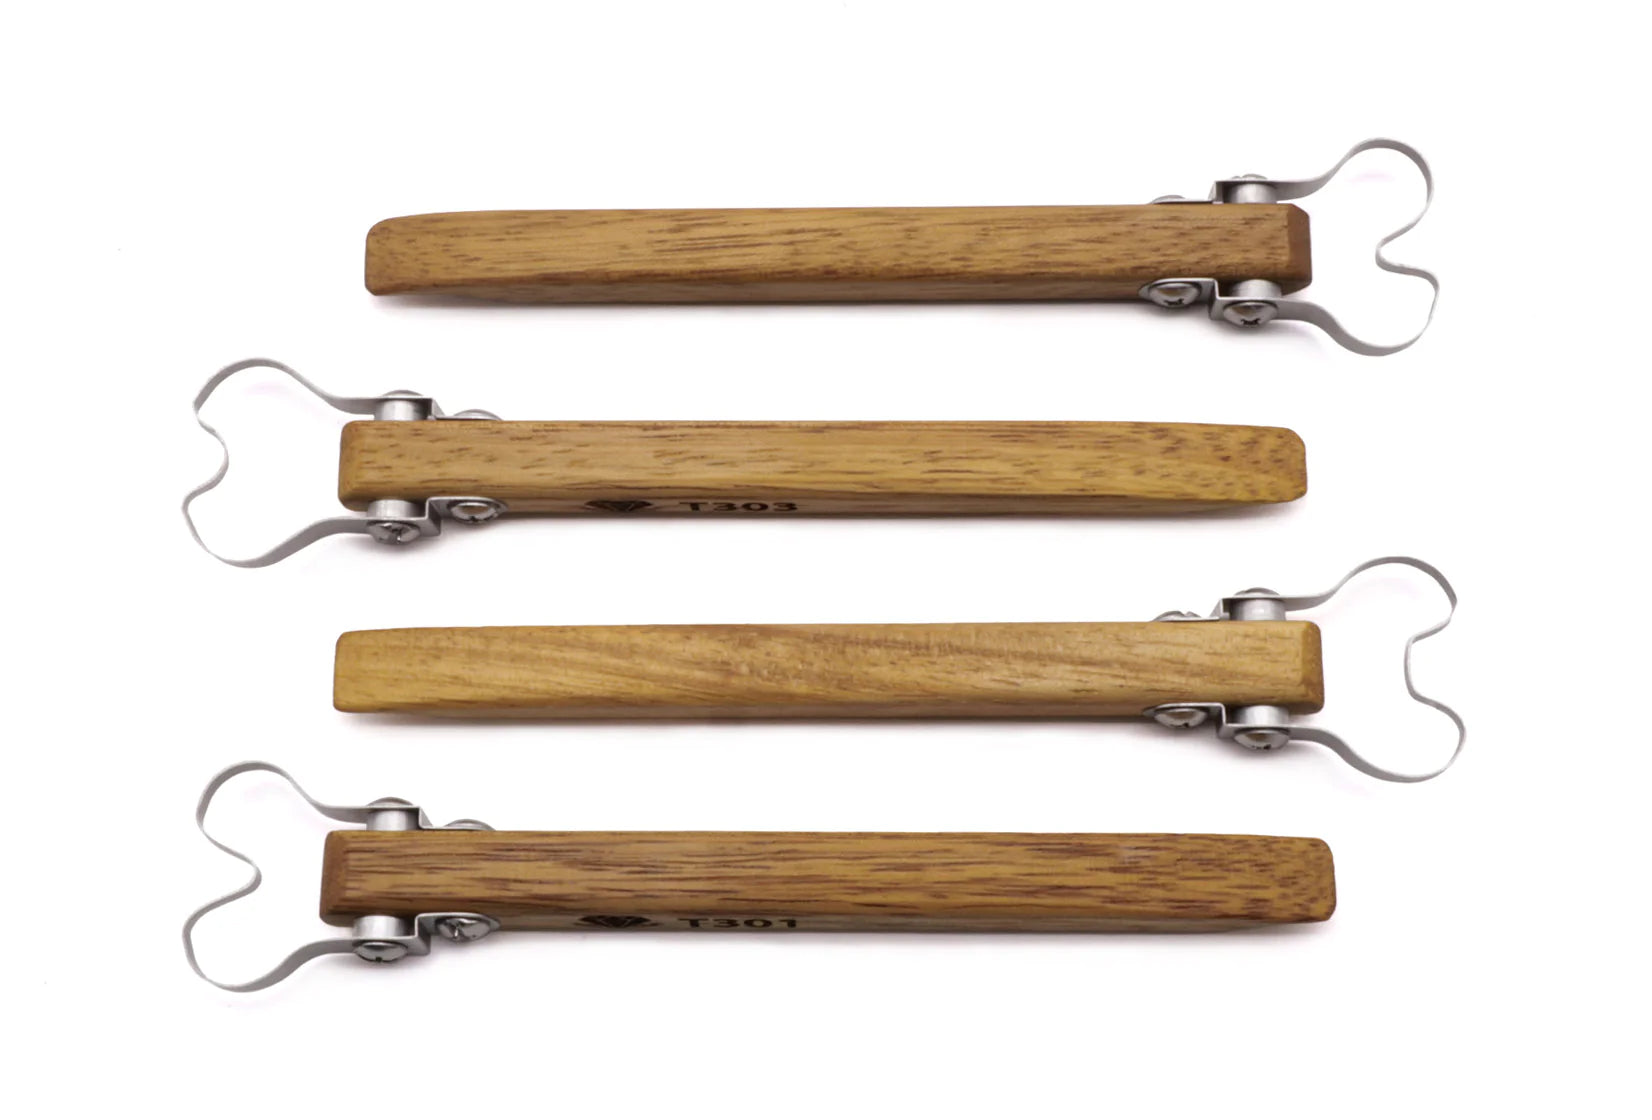 4-Piece Feature Trimming Tools Set 1 (T301, T302, T303, T304)